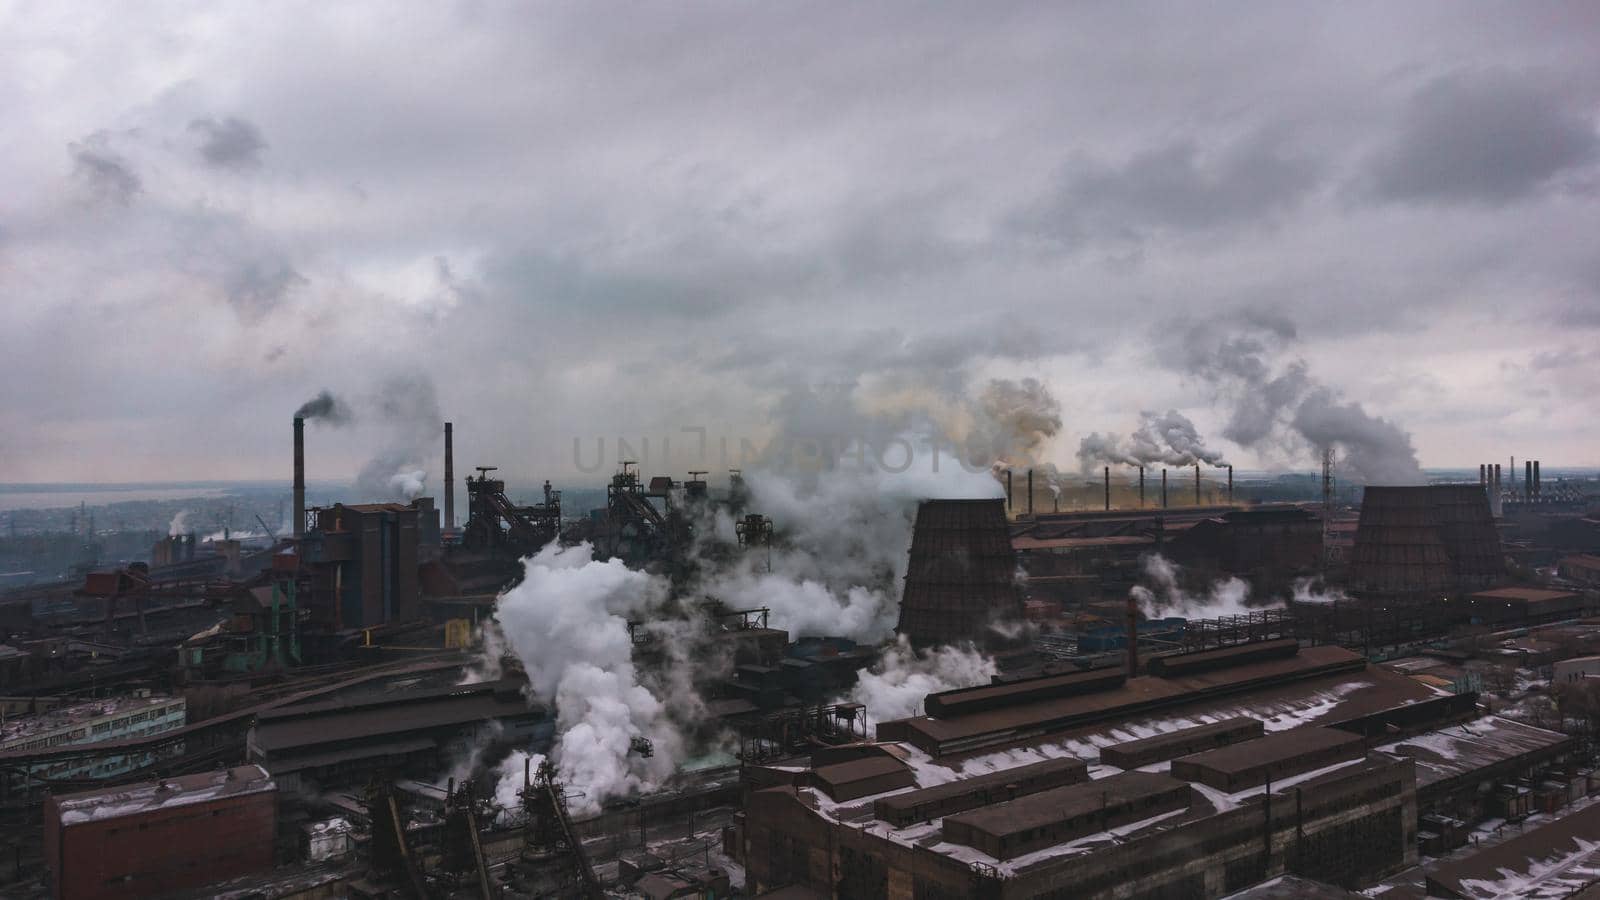 industry metallurgical plant dawn smoke smog emissions bad ecology aerial photography. climate change. industrial background. Aerial shot of industrial air pollution